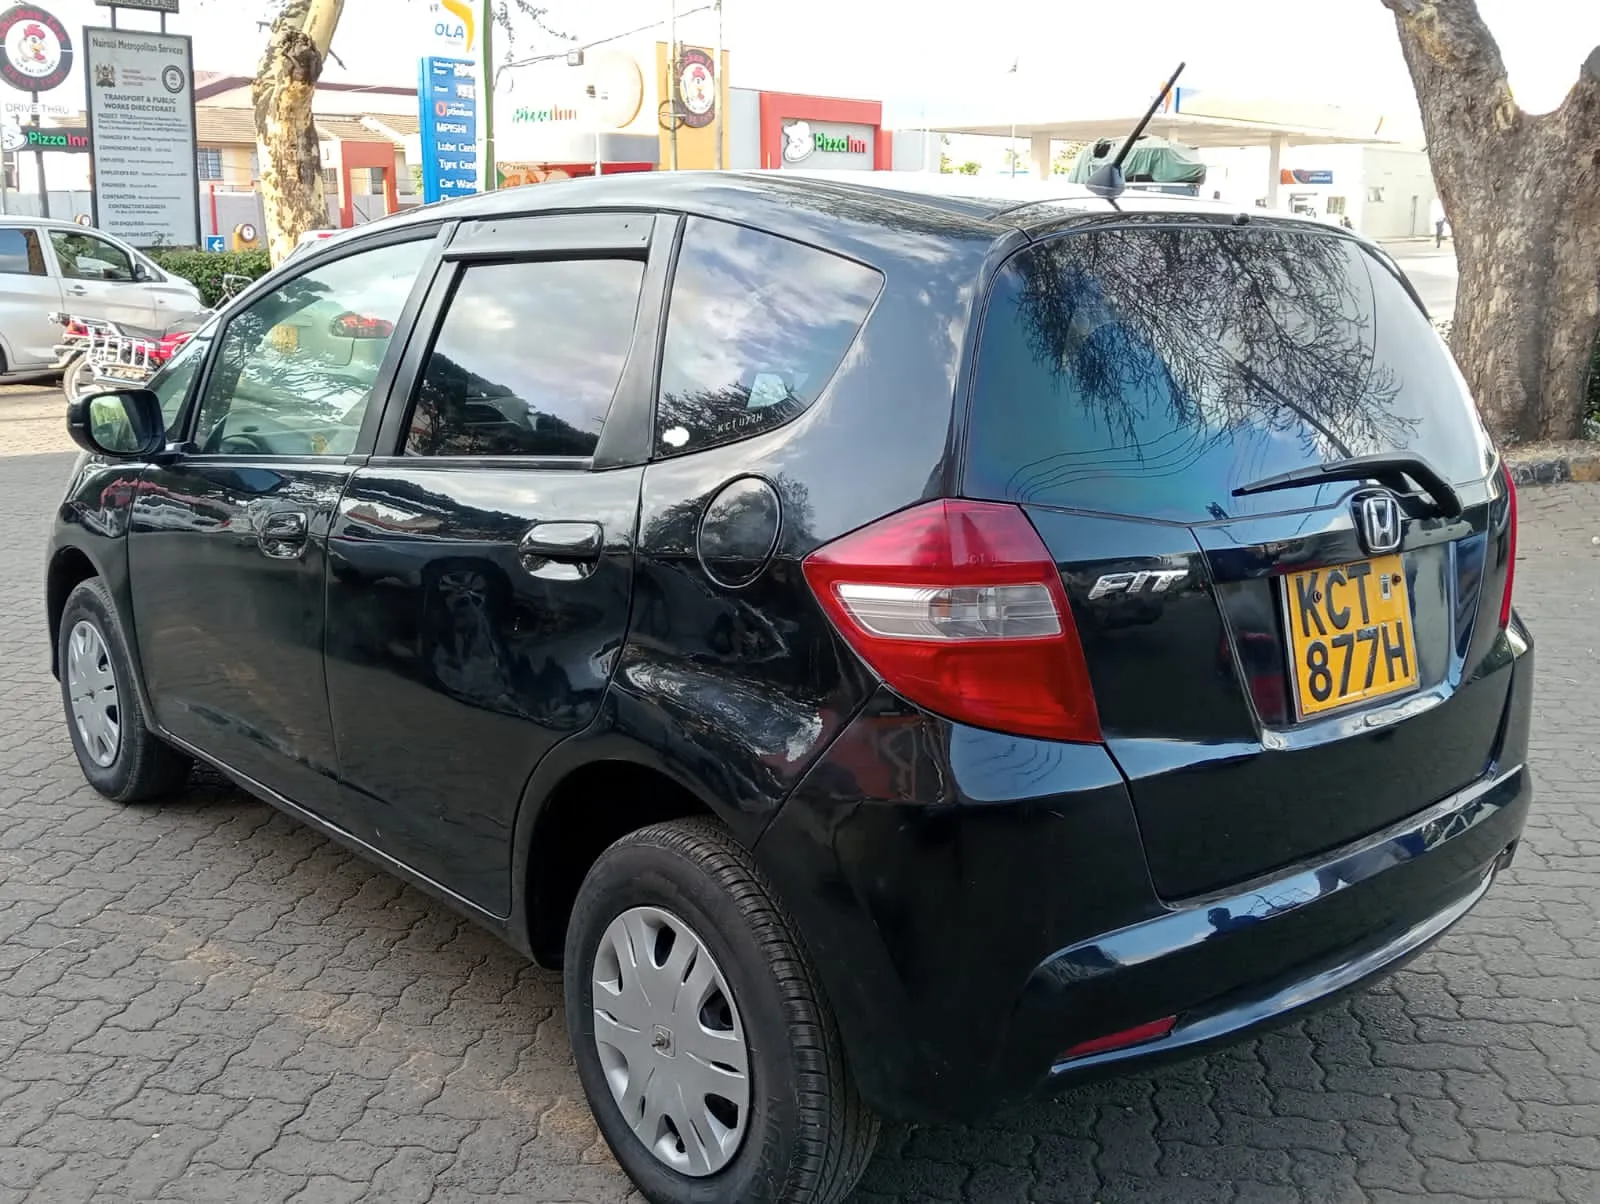 Honda fit for Sale in Kenya 🔥 🔥 QUICK SALE You Pay 30% Deposit Trade in OK Wow hire purchase installments